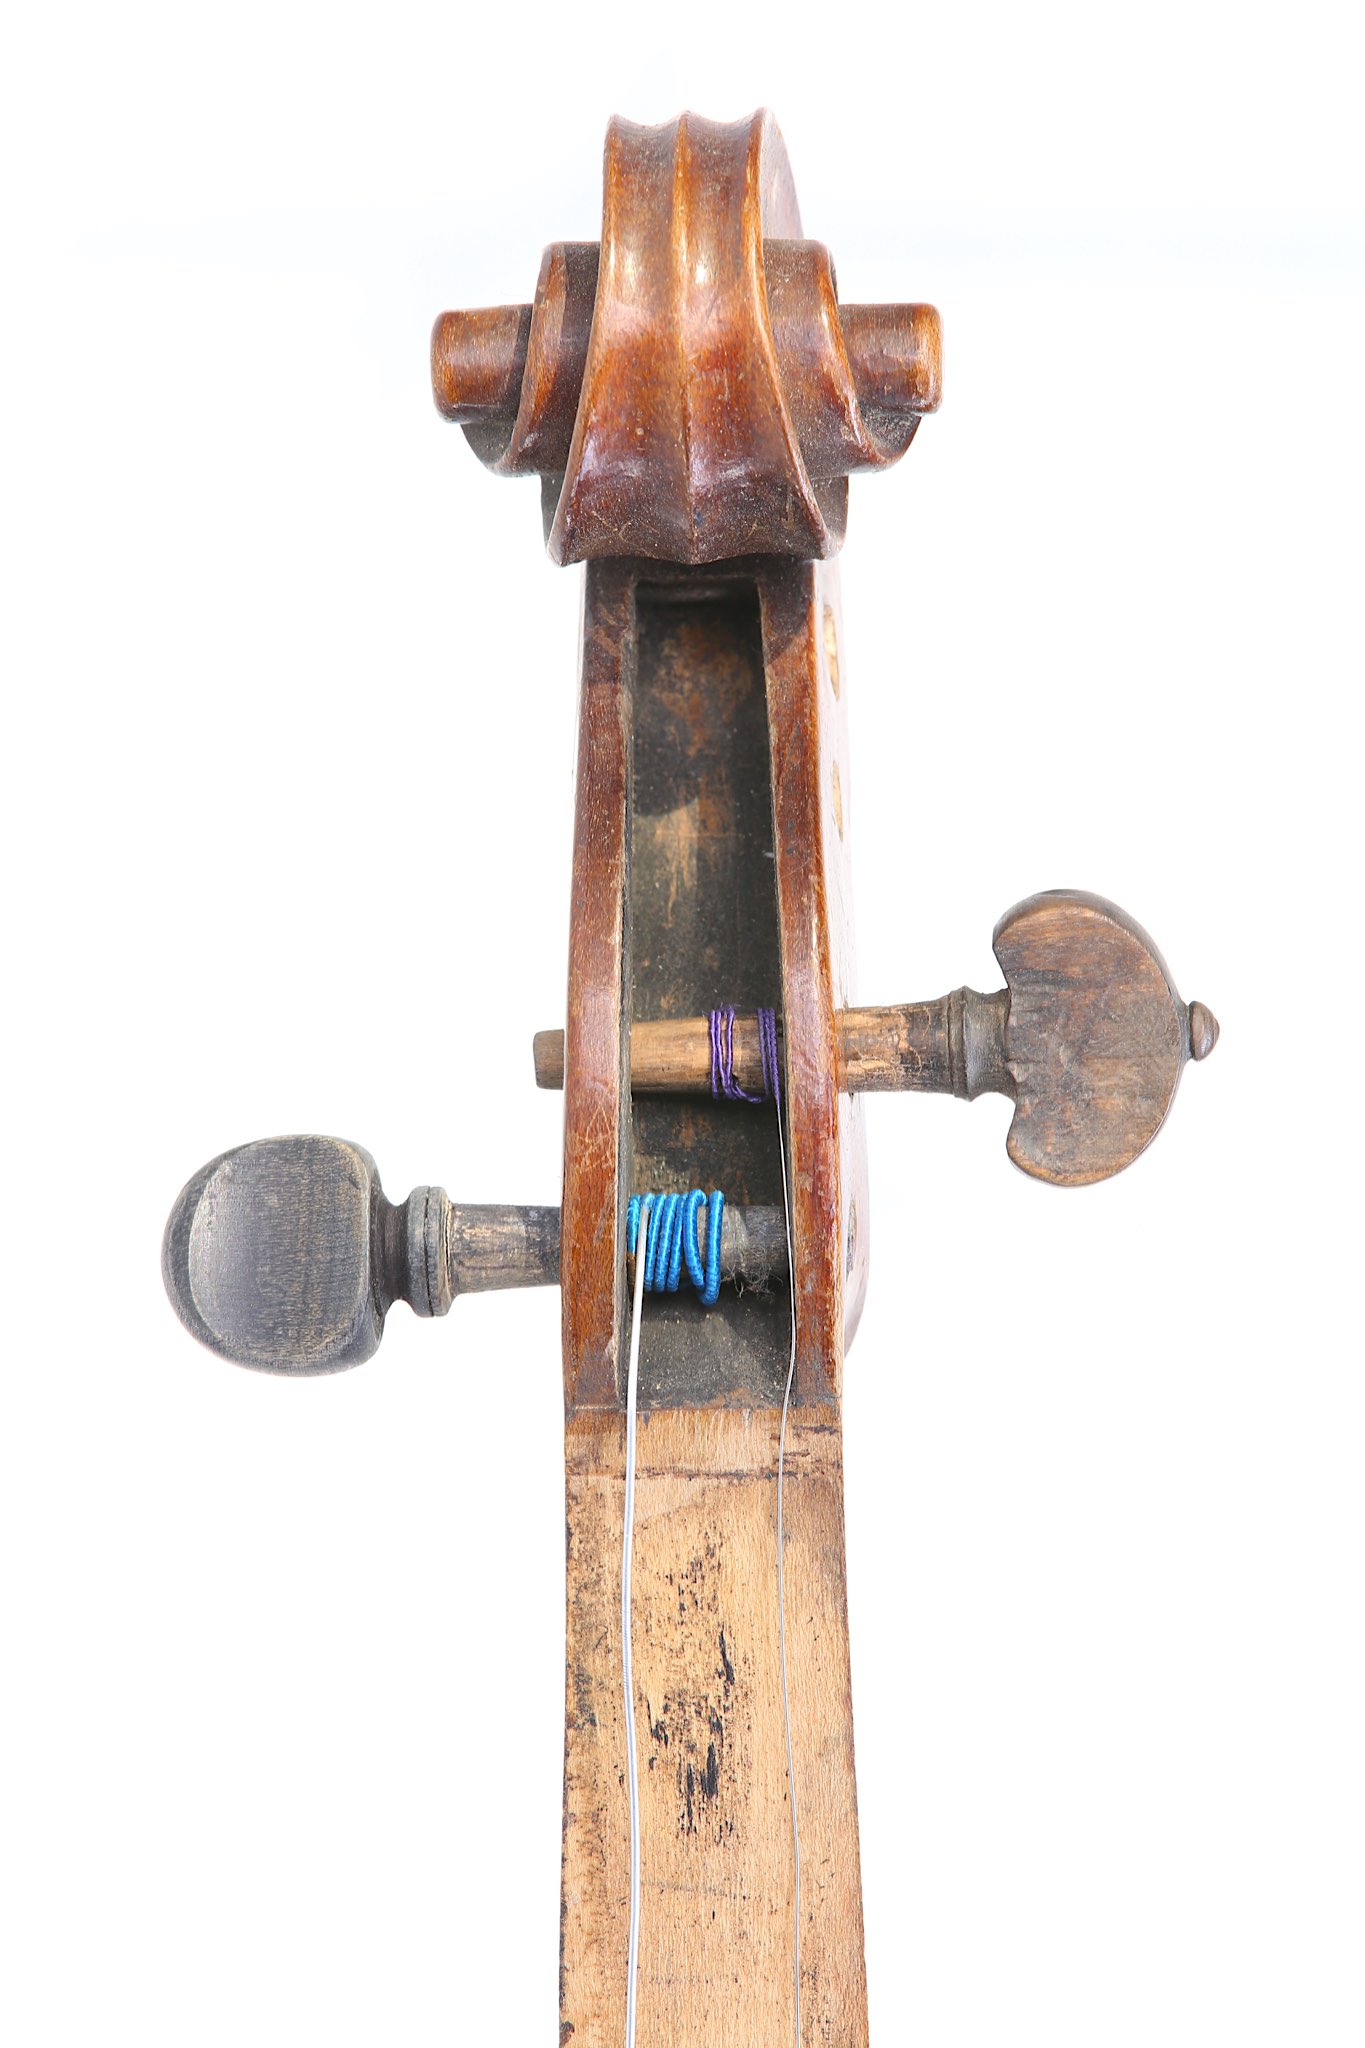 German violin. Early 20th century. No labelled. Two piece back ,medium figure flame maple wood, - Image 6 of 8